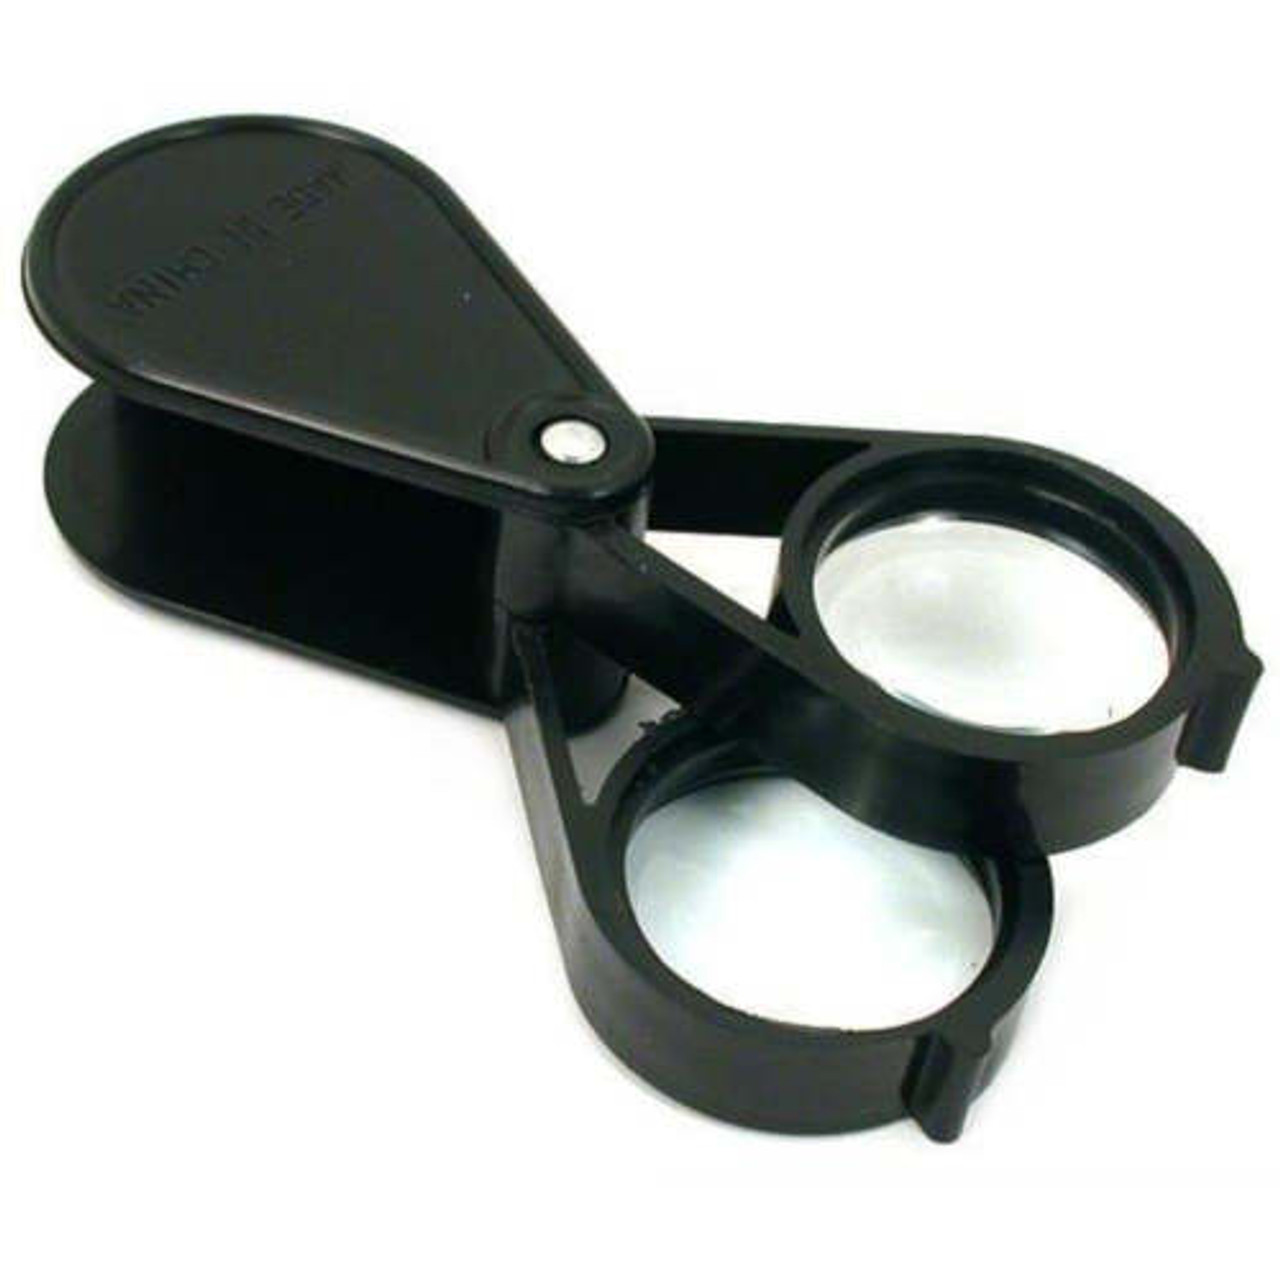 3x, Classic Folding Pocket Magnifier, MADE IN USA